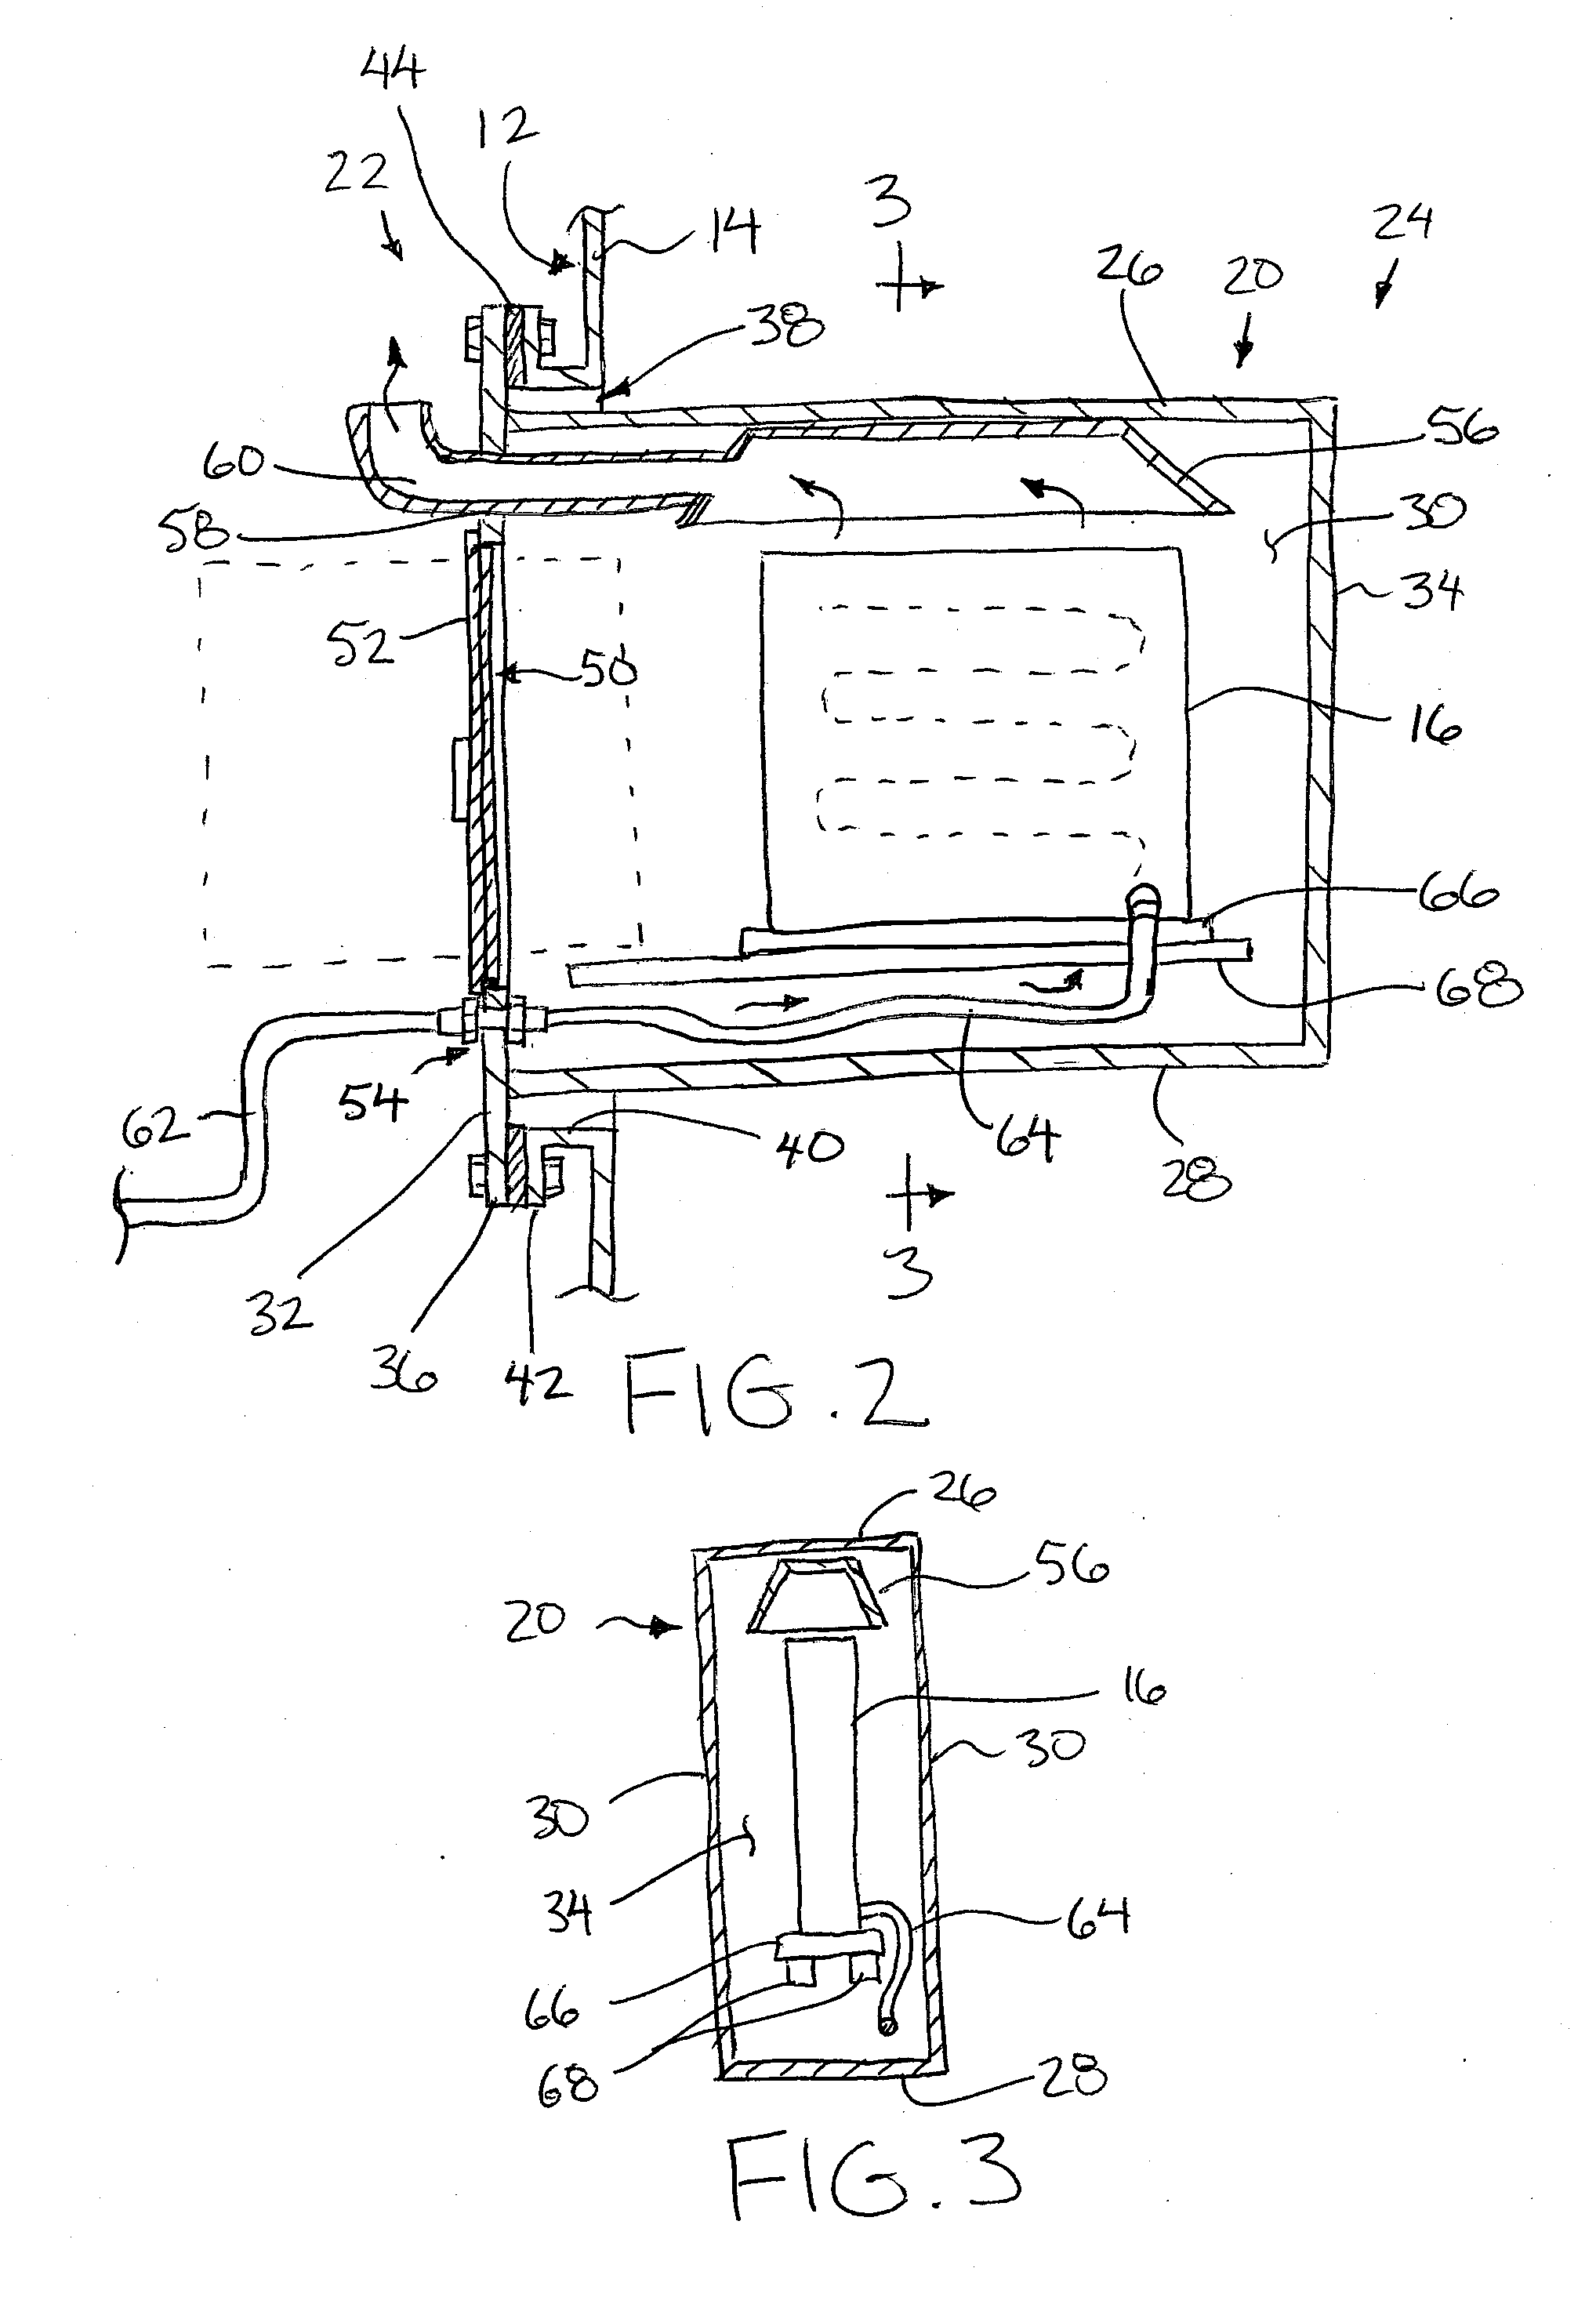 Catalytic Heating Assembly for an Oil Storage Tank